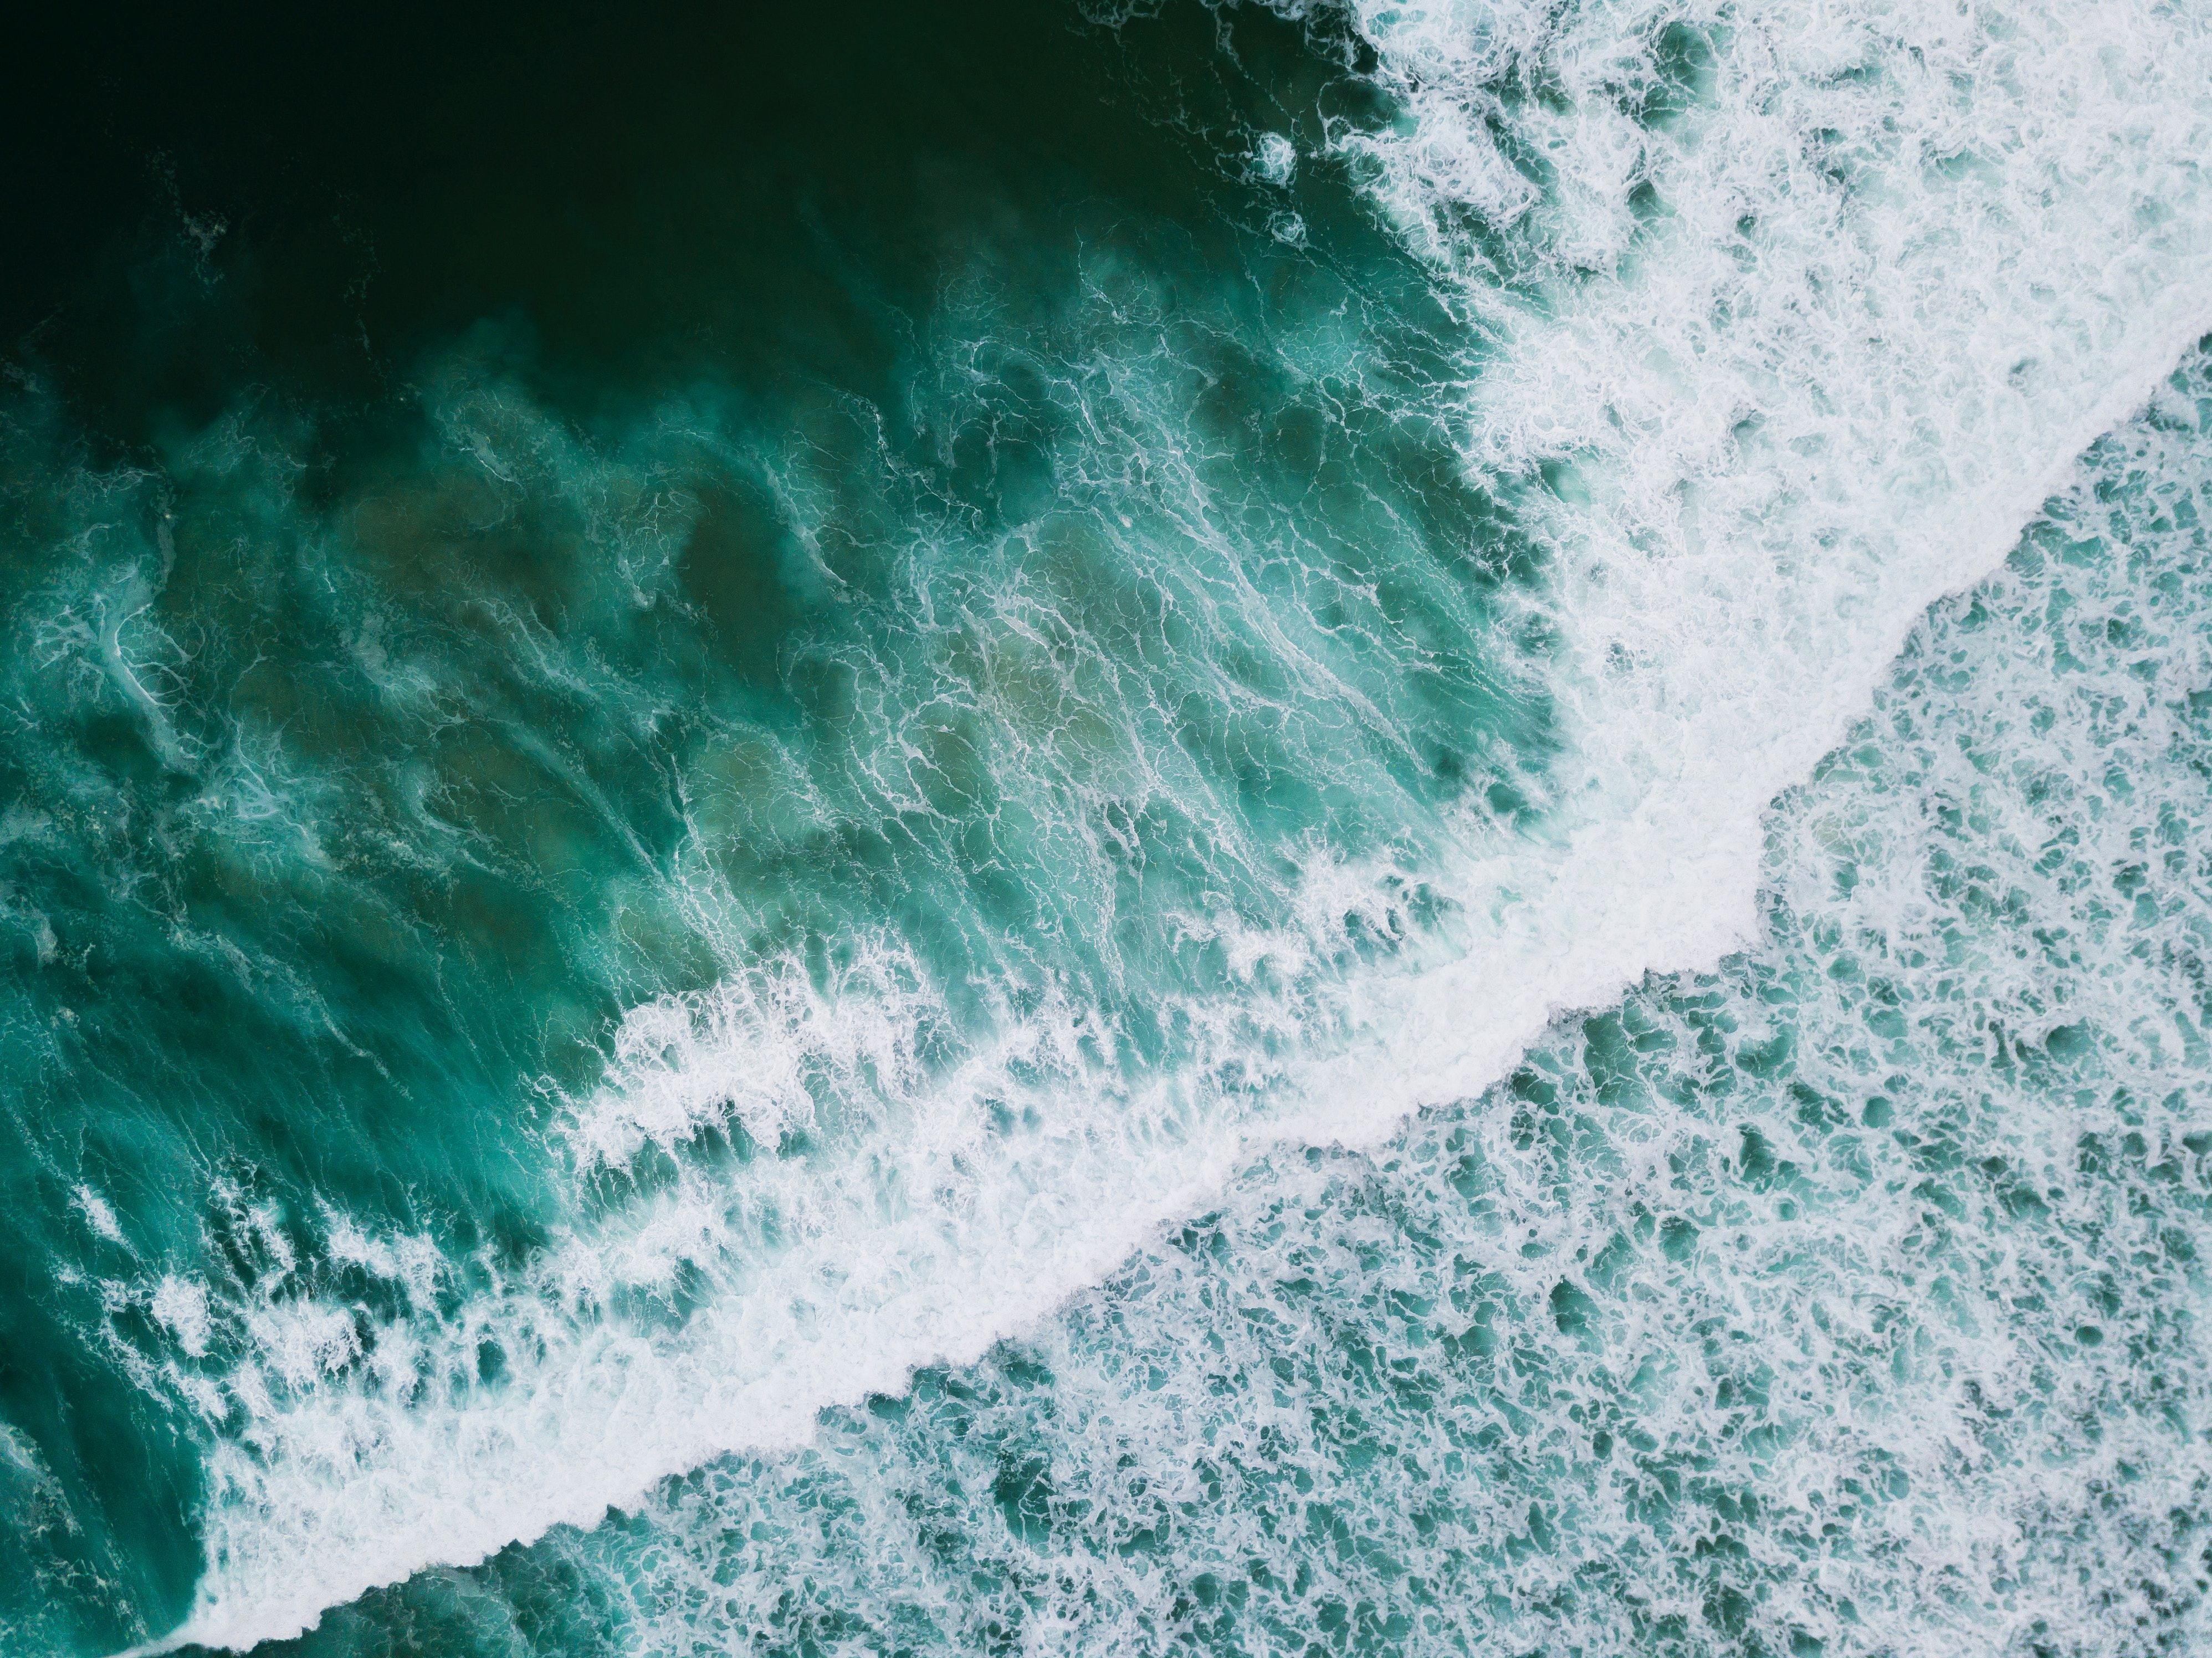 3992x2992 #ocean, #wave, #wafe, #drone, #waveing, #background, # water, #green water, #beach, #aerial, #wallpaper, #landscape, #sea, #nature, #Creative Commons image, #water green. Mocah HD Wallpaper